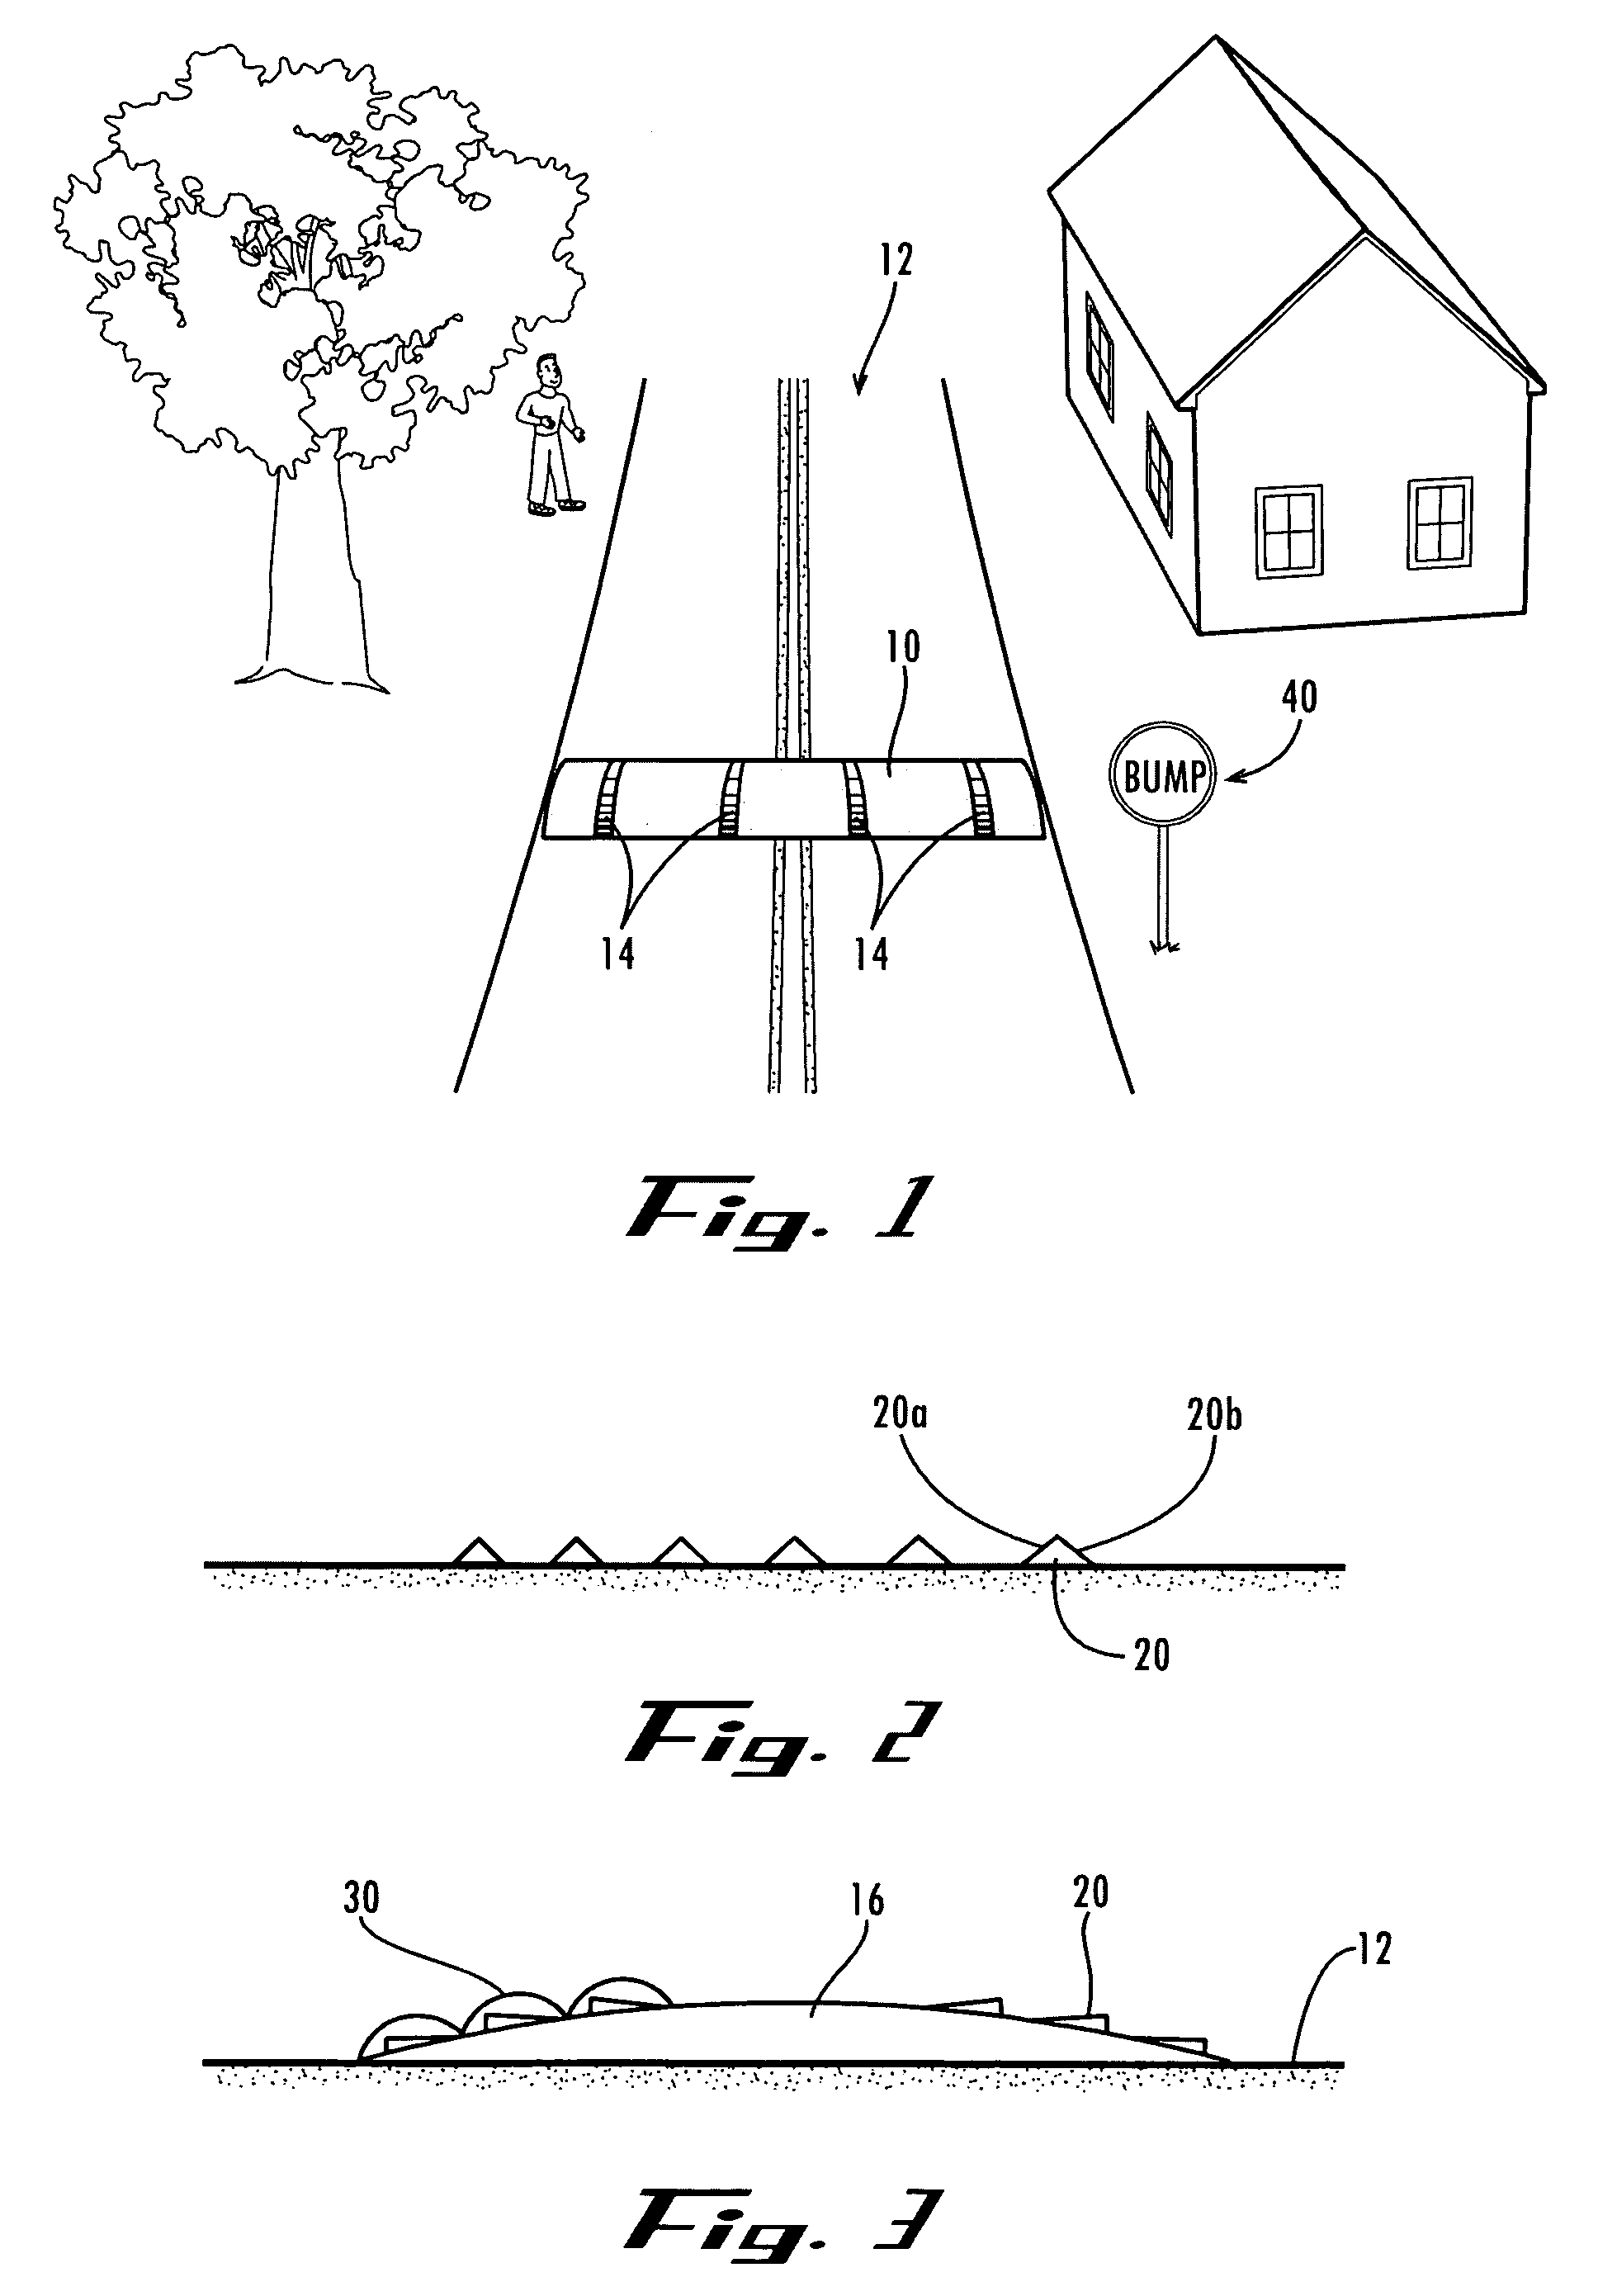 Optical illusion speed bump and method of using the same